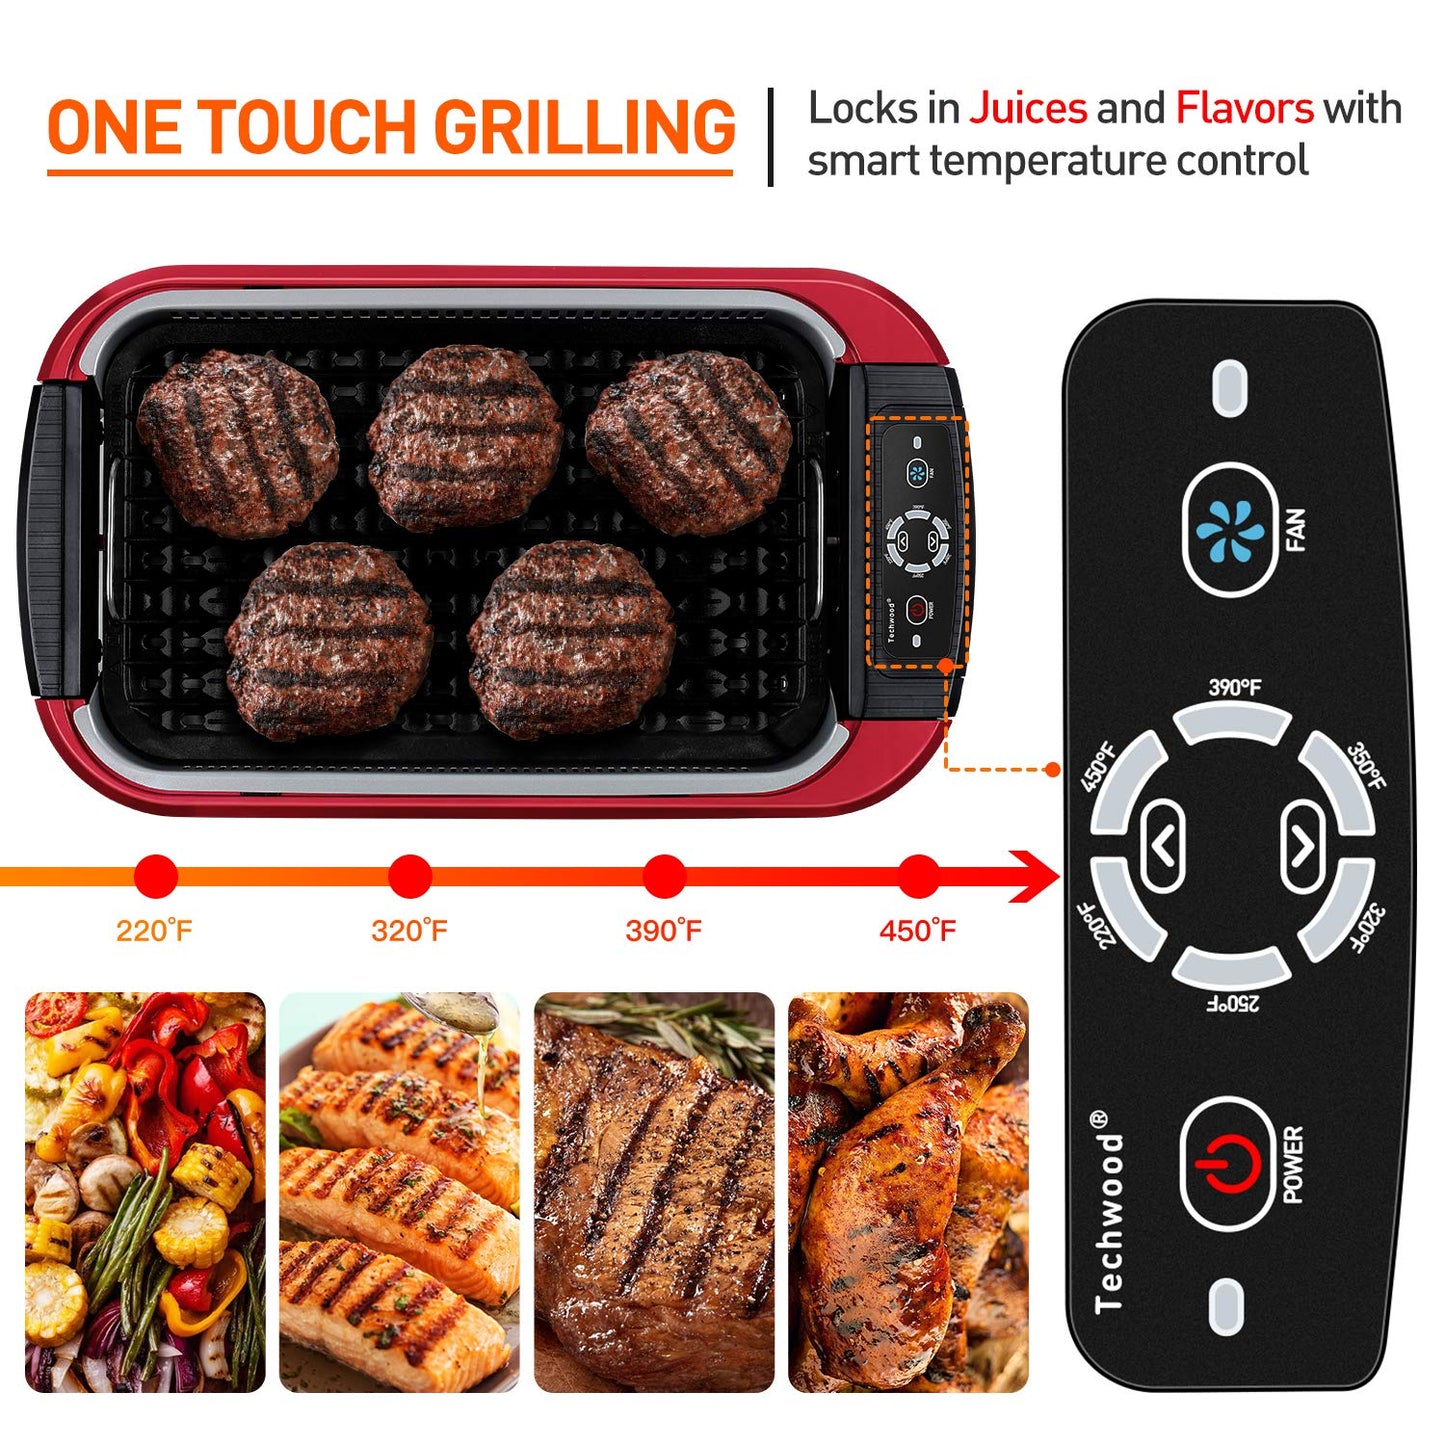 Techwood 1500W Electric Indoor Grill with Tempered Glass Lid, Compact & Portable Non-stick BBQ Grill, Turbo Smoke Extractor Technology, Drip Tray& Double Removable Plate, Red